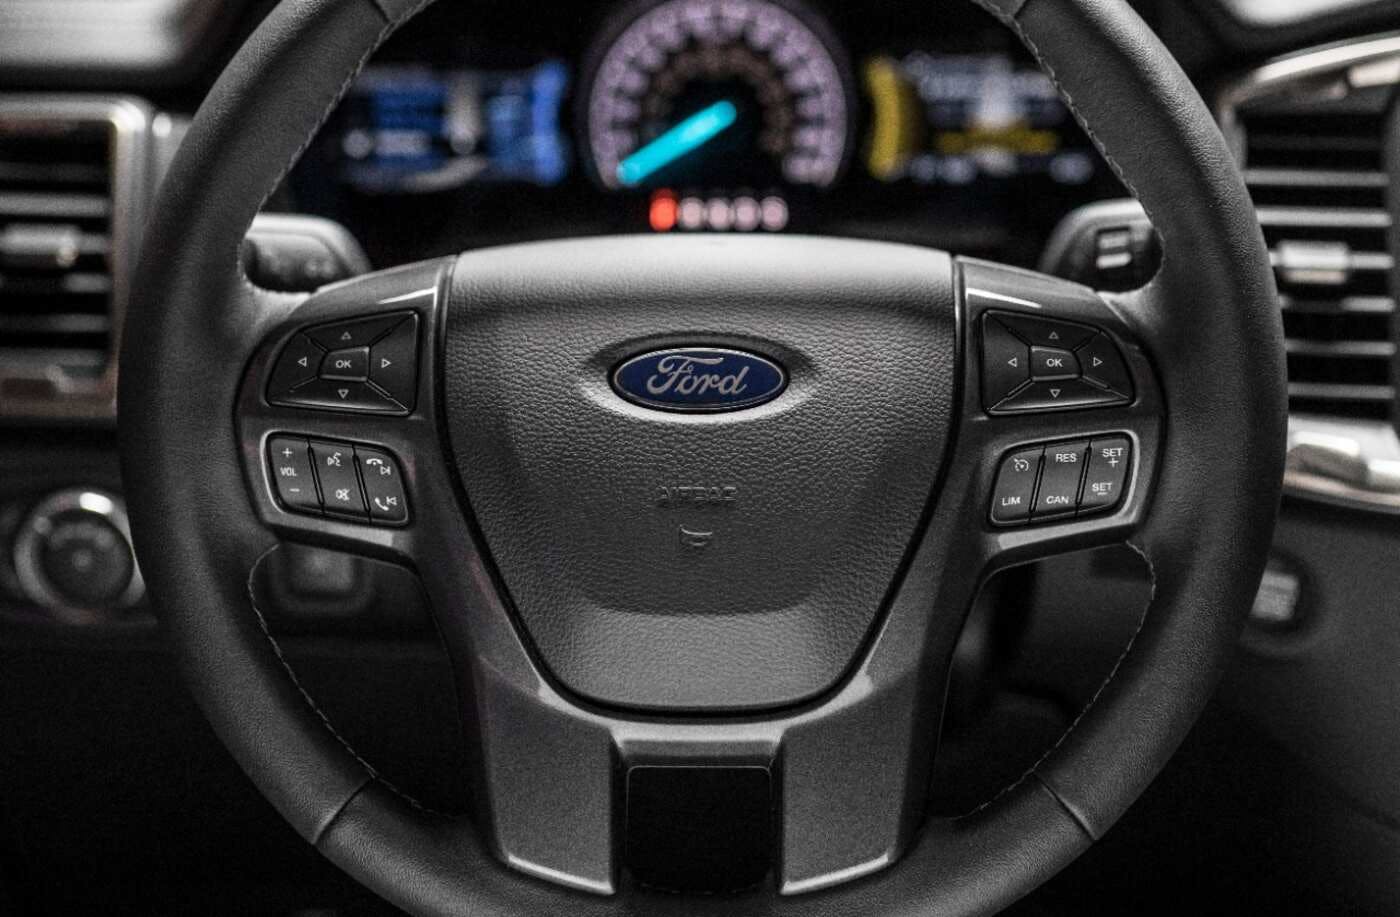 2019 Ford Ranger Comparisons Reviews Pictures Truecar